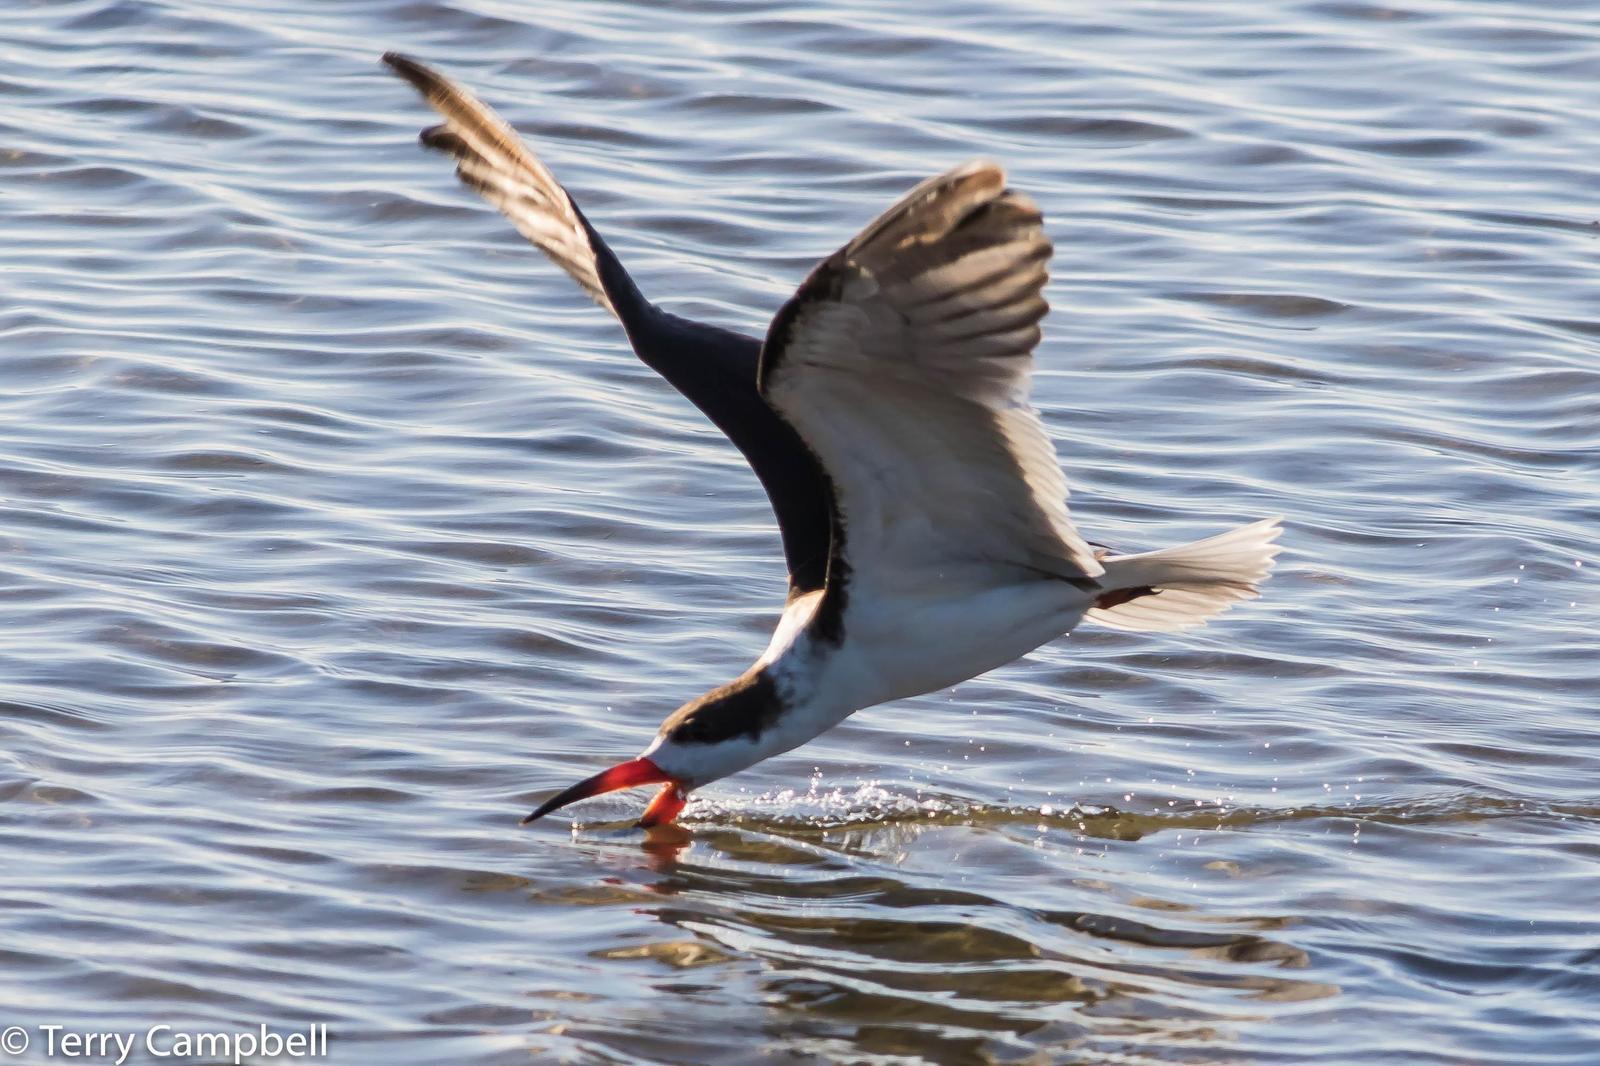 Black Skimmer Photo by Terry Campbell